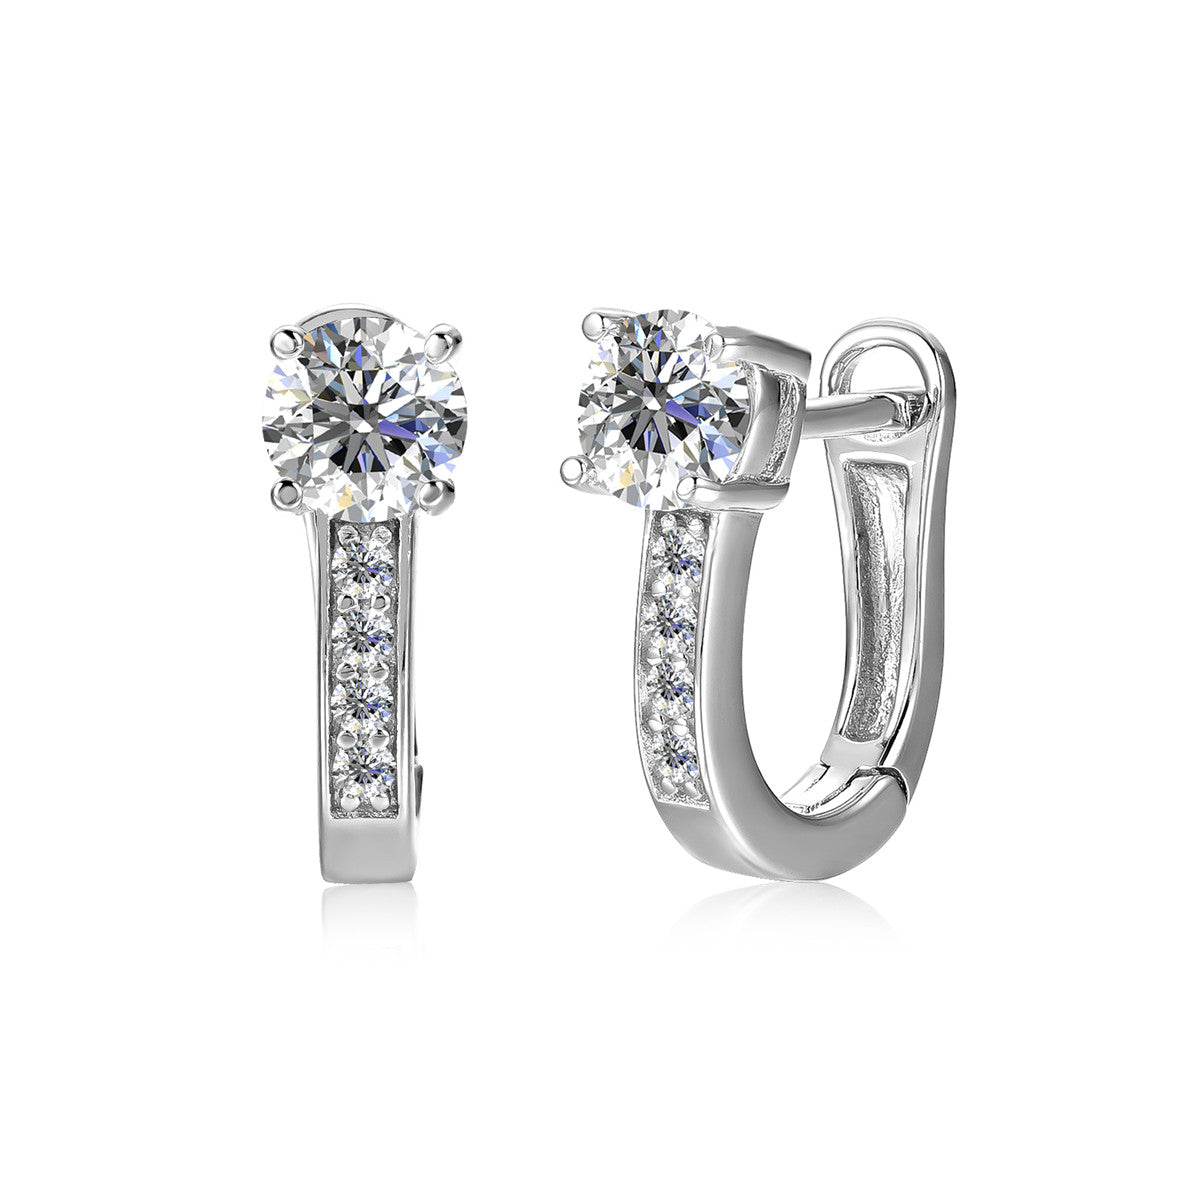 Moissanite by Cate & Chloe Genesis Sterling Silver Hoop Earrings with Moissanite and 5A Cubic Zirconia Crystals